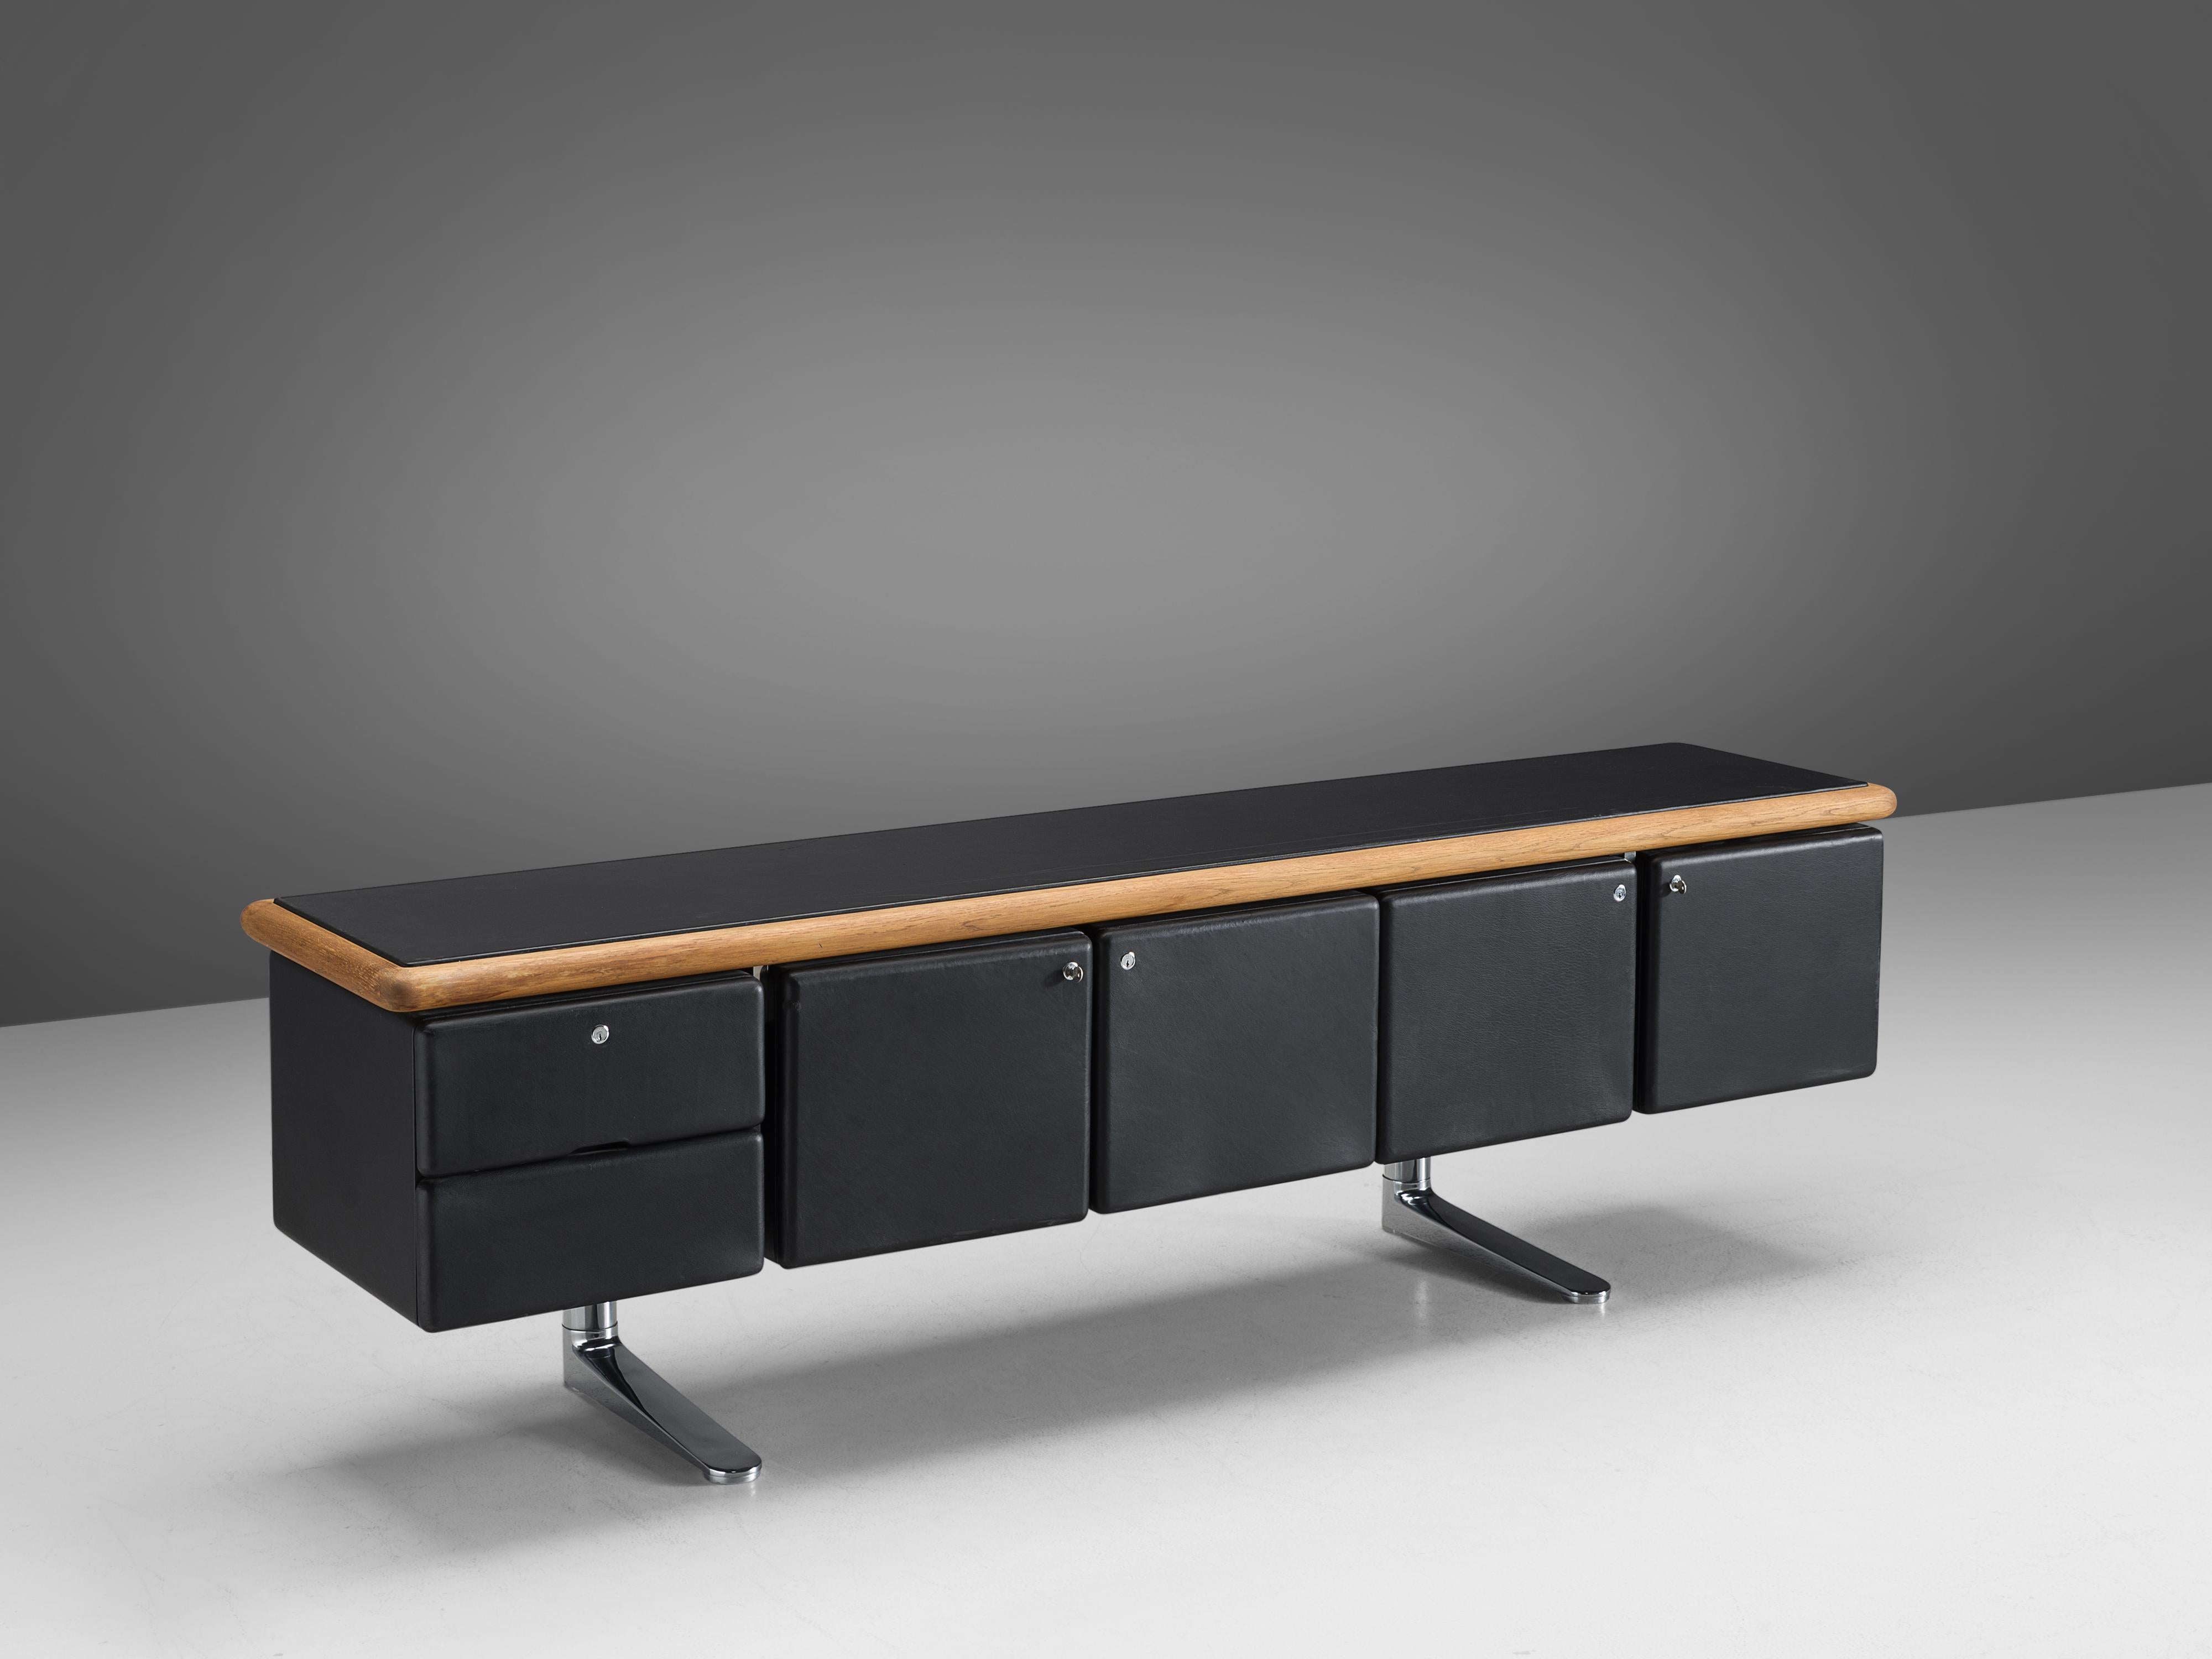 Warren Platner for Knoll, sideboard, chrome, oak, leather, United States, after 1973

This sideboard is designed by American modernist Warren Platner. He is most known for his airy metal, sculptural lounge chairs. Perhaps it is surprising that